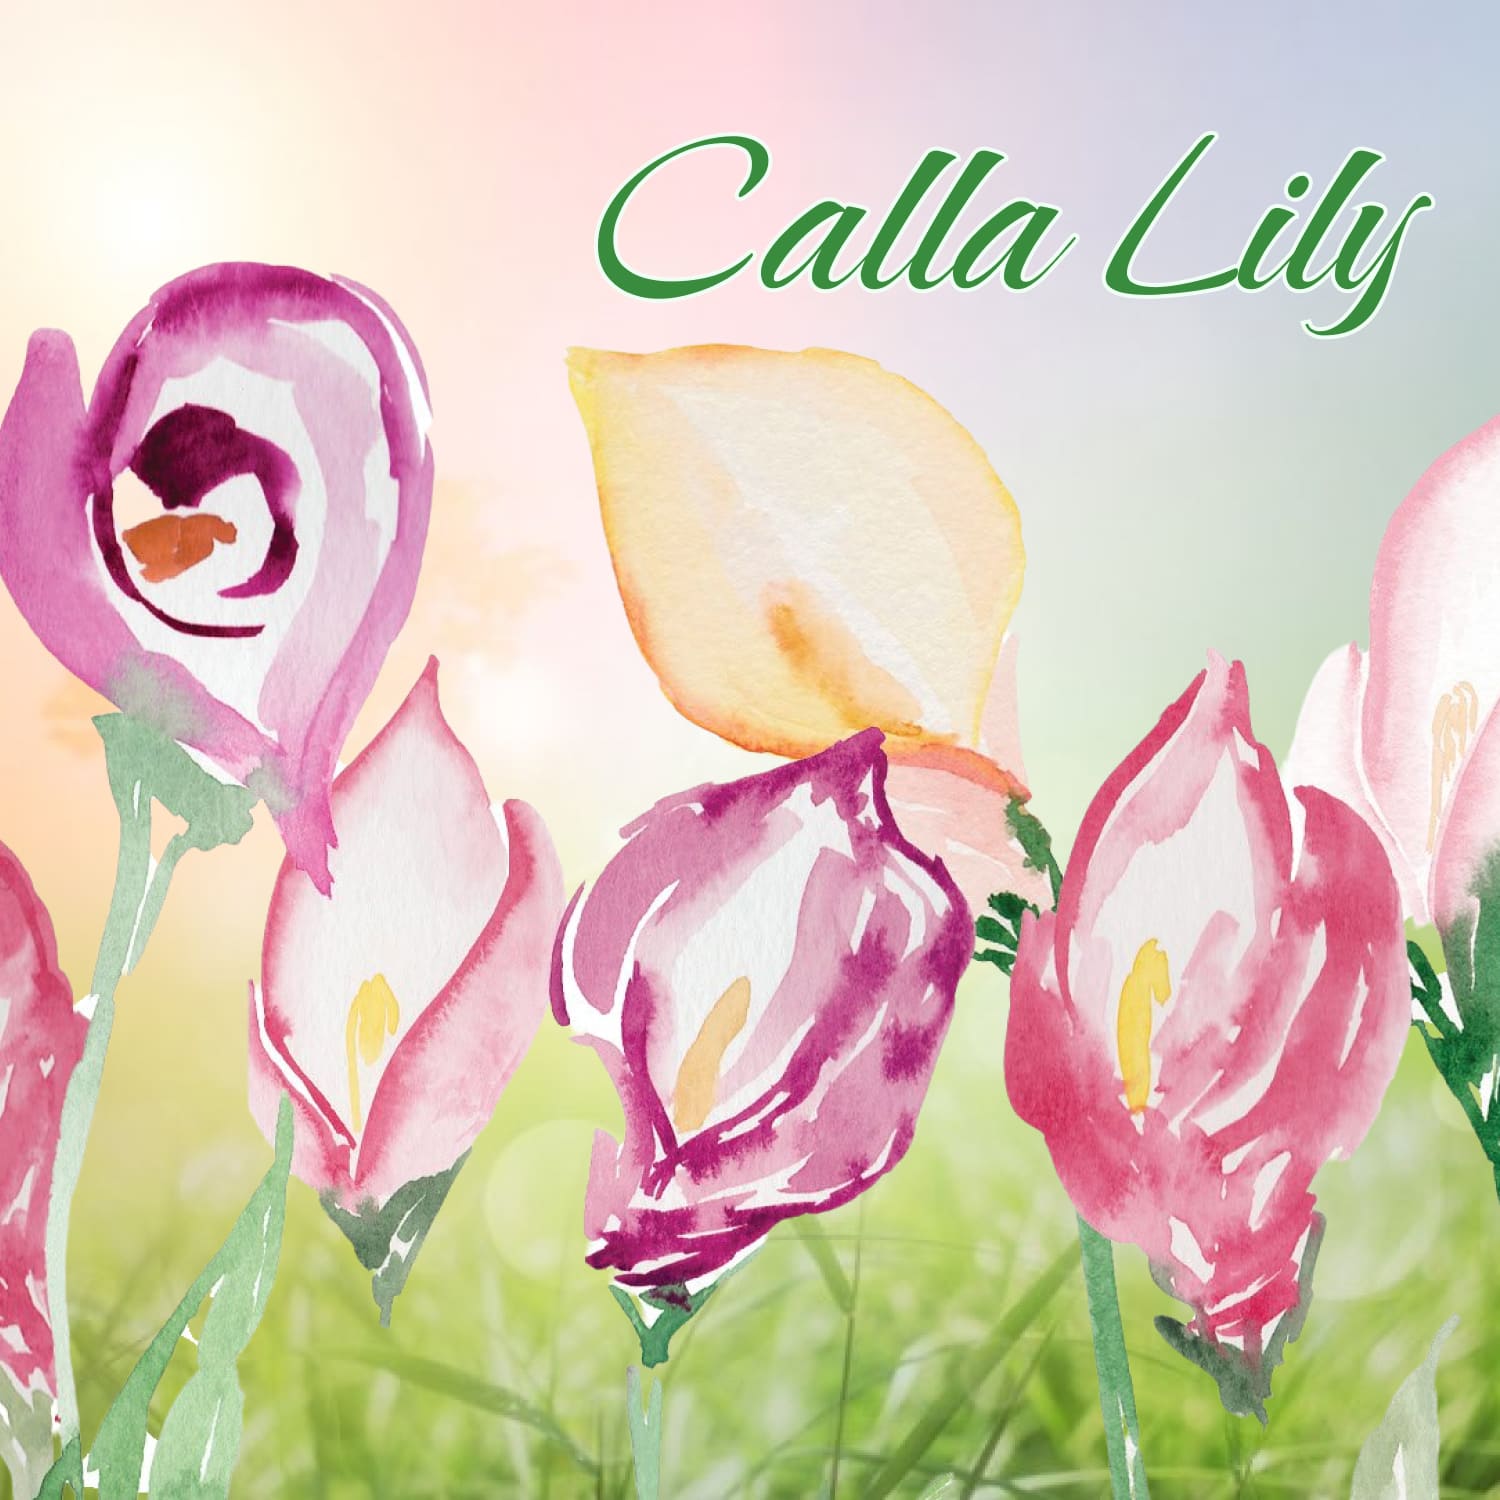 Eight calla lily illustrations painted in watercolors in a loose style in various colors.